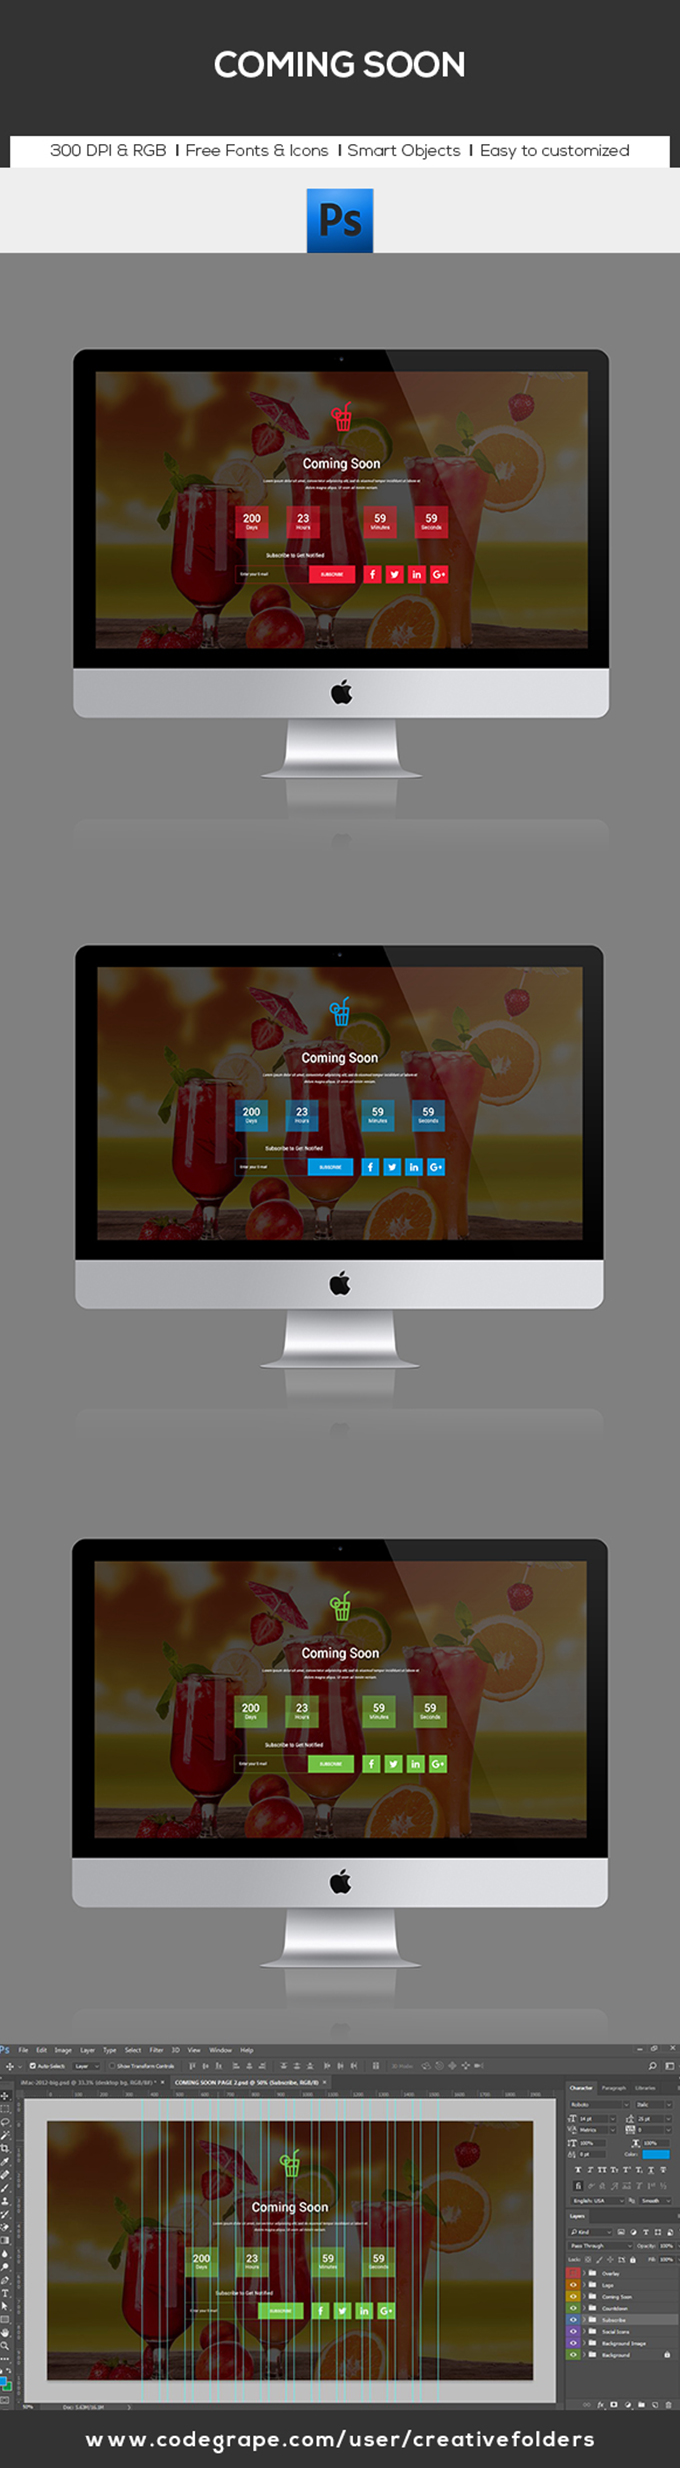 Coming Soon PSD Template